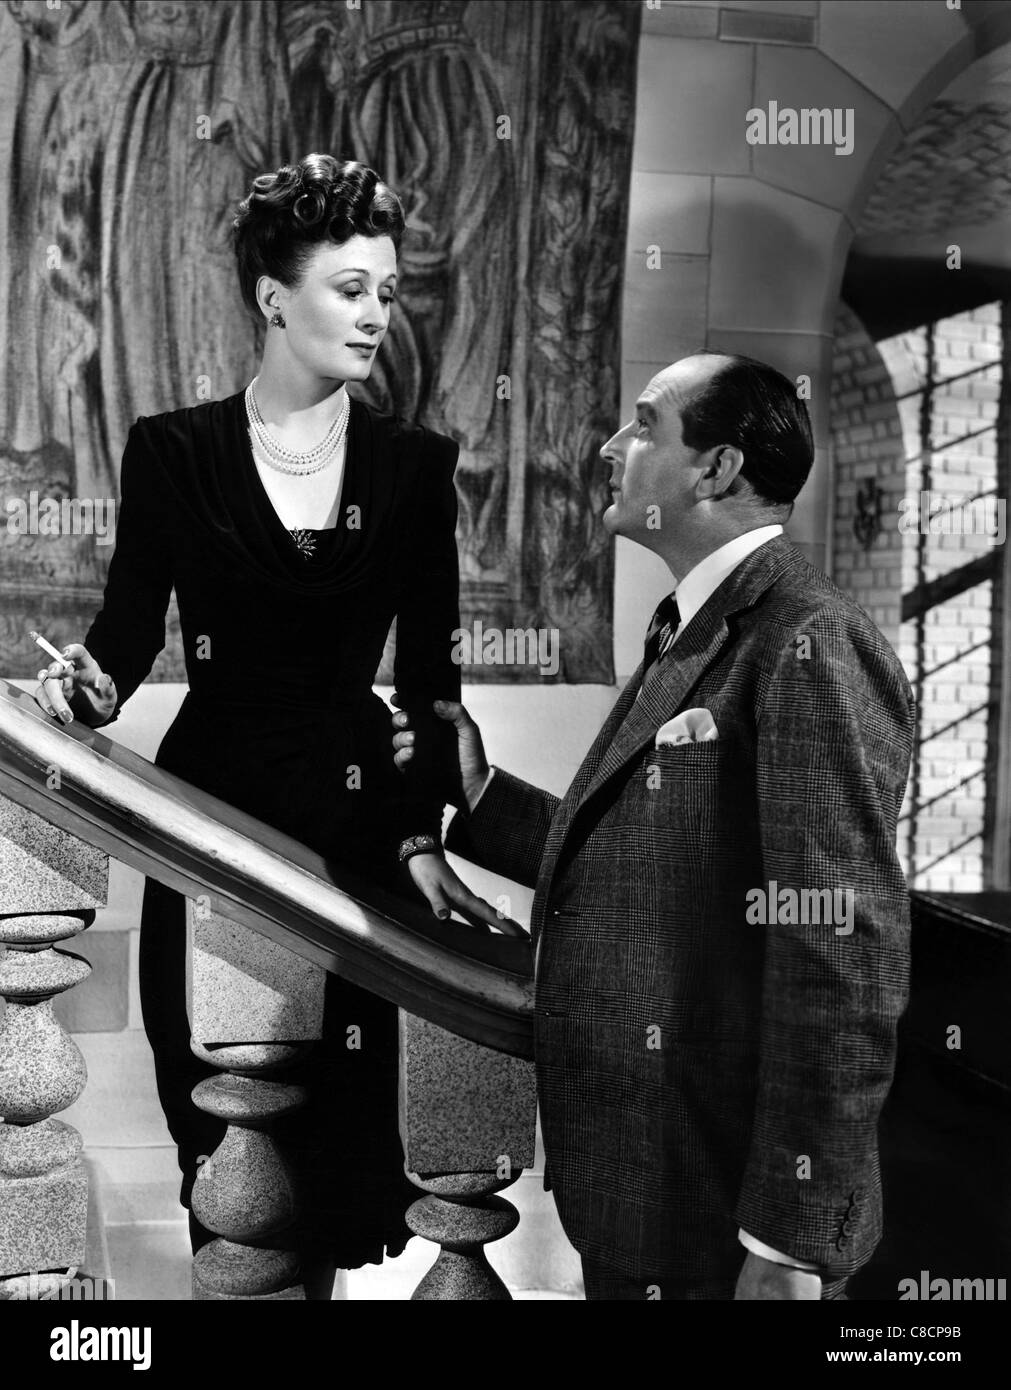 URSULA JEANS, CECIL PARKER, THE WOMAN IN THE HALL, 1947 Stock Photo - Alamy